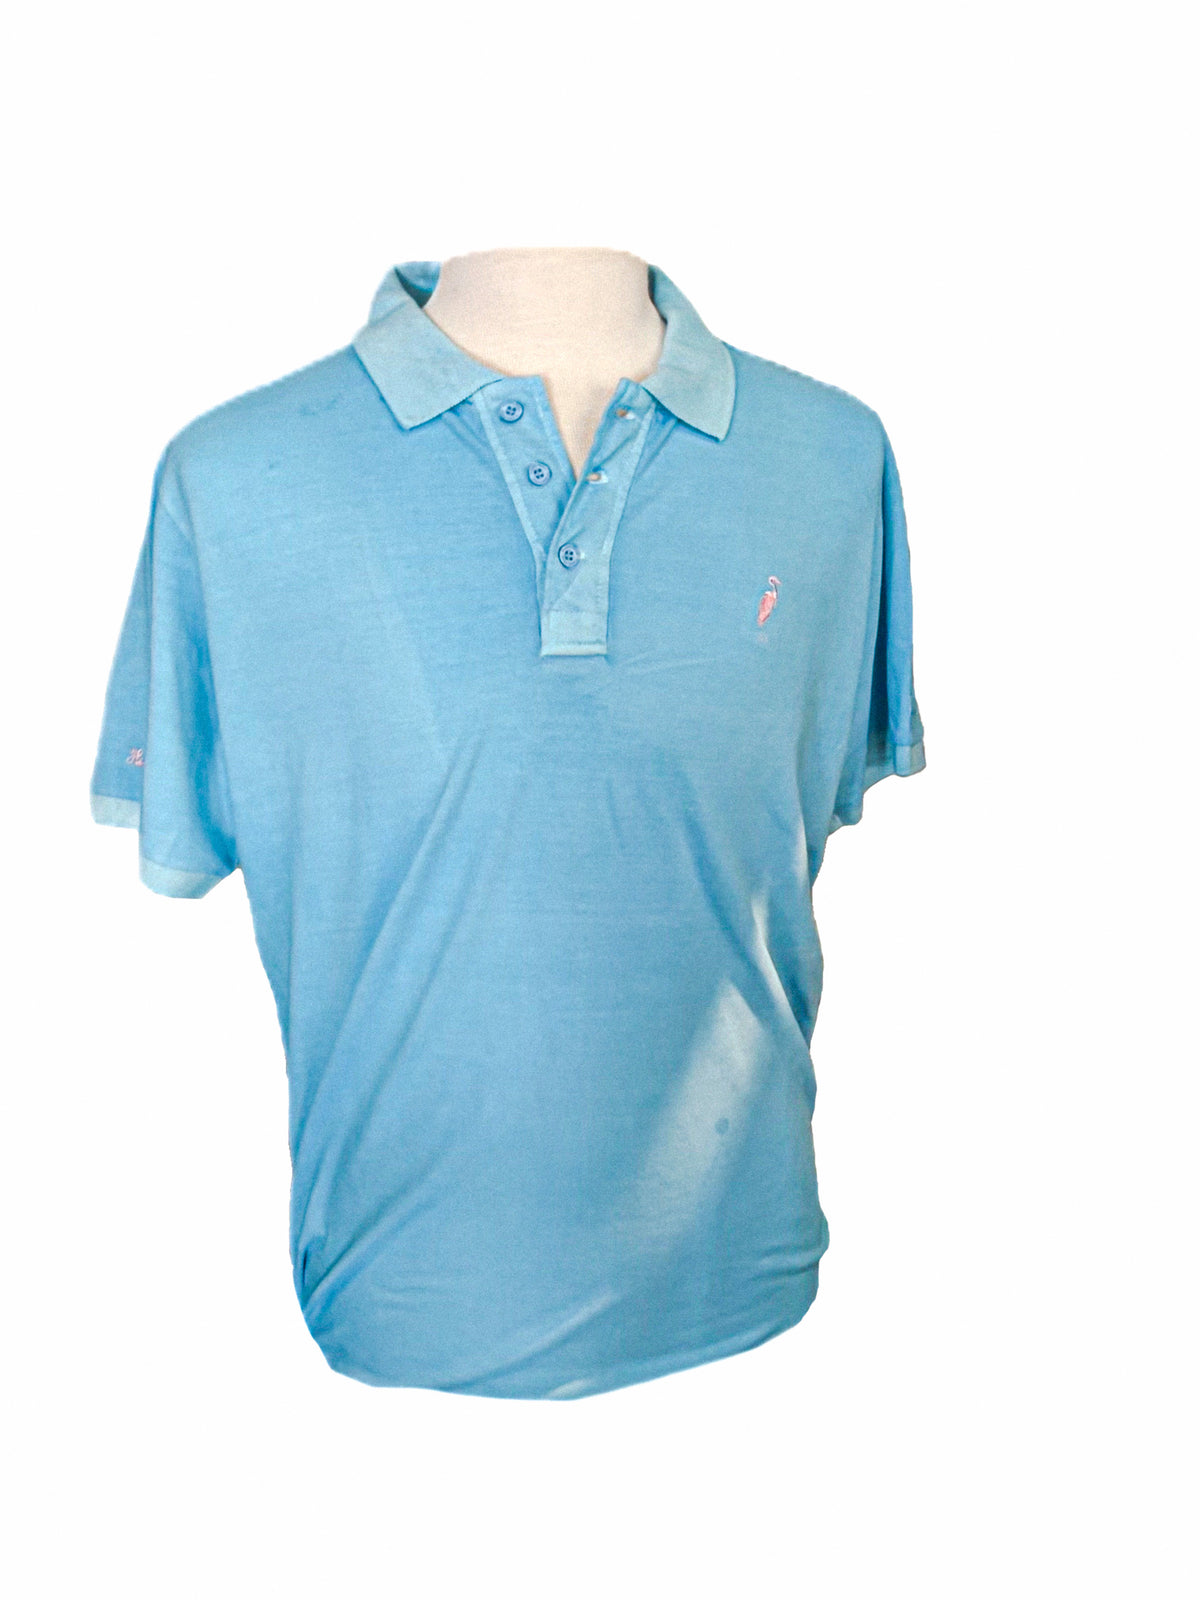 100% Cotton Stone Washed Polo by TDalton Clothing